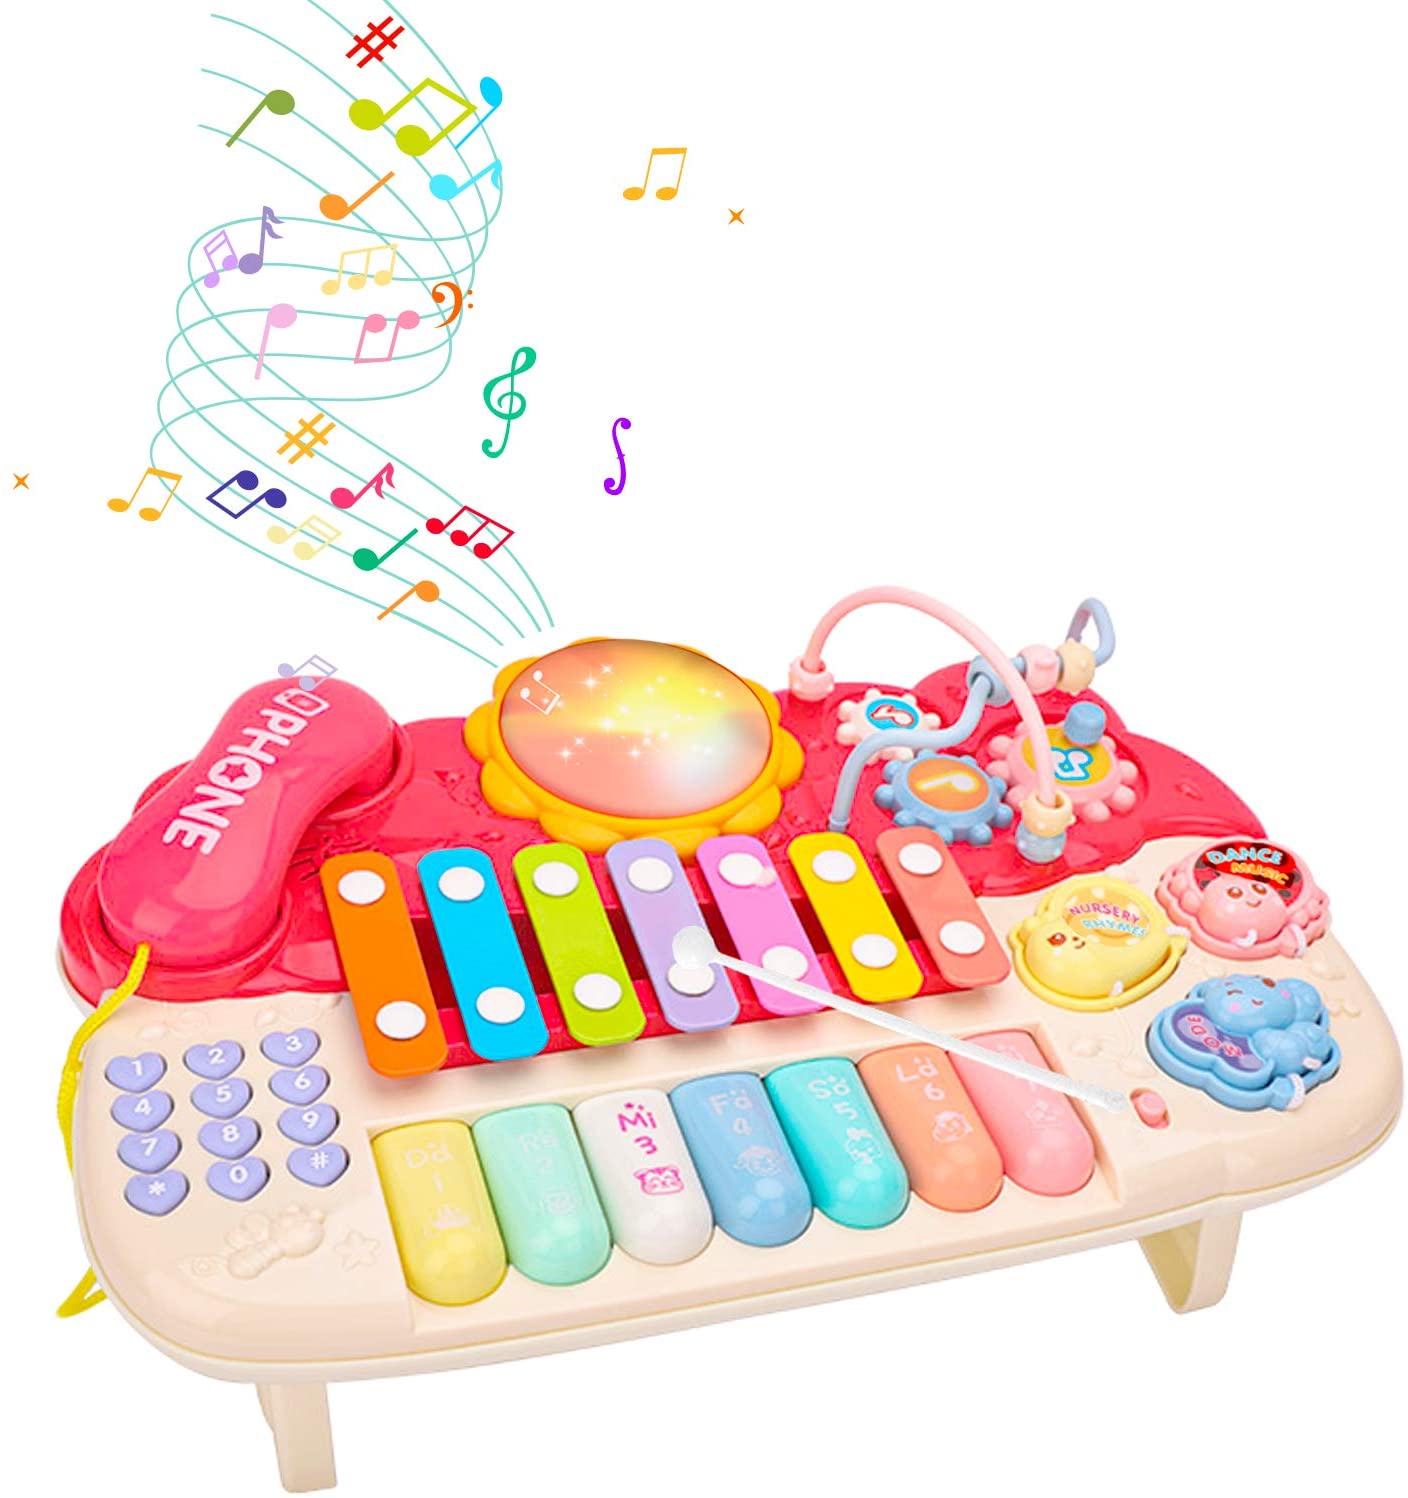 18 Years Factory Wooden Mechanical Toys - Arkmiido Baby Musical Toys – Drum Toy Set with Phone Bead Maze Gear Xylophone Piano – Mucial Toys for Toddlers Learning Toys for 18+ Boys Girl...